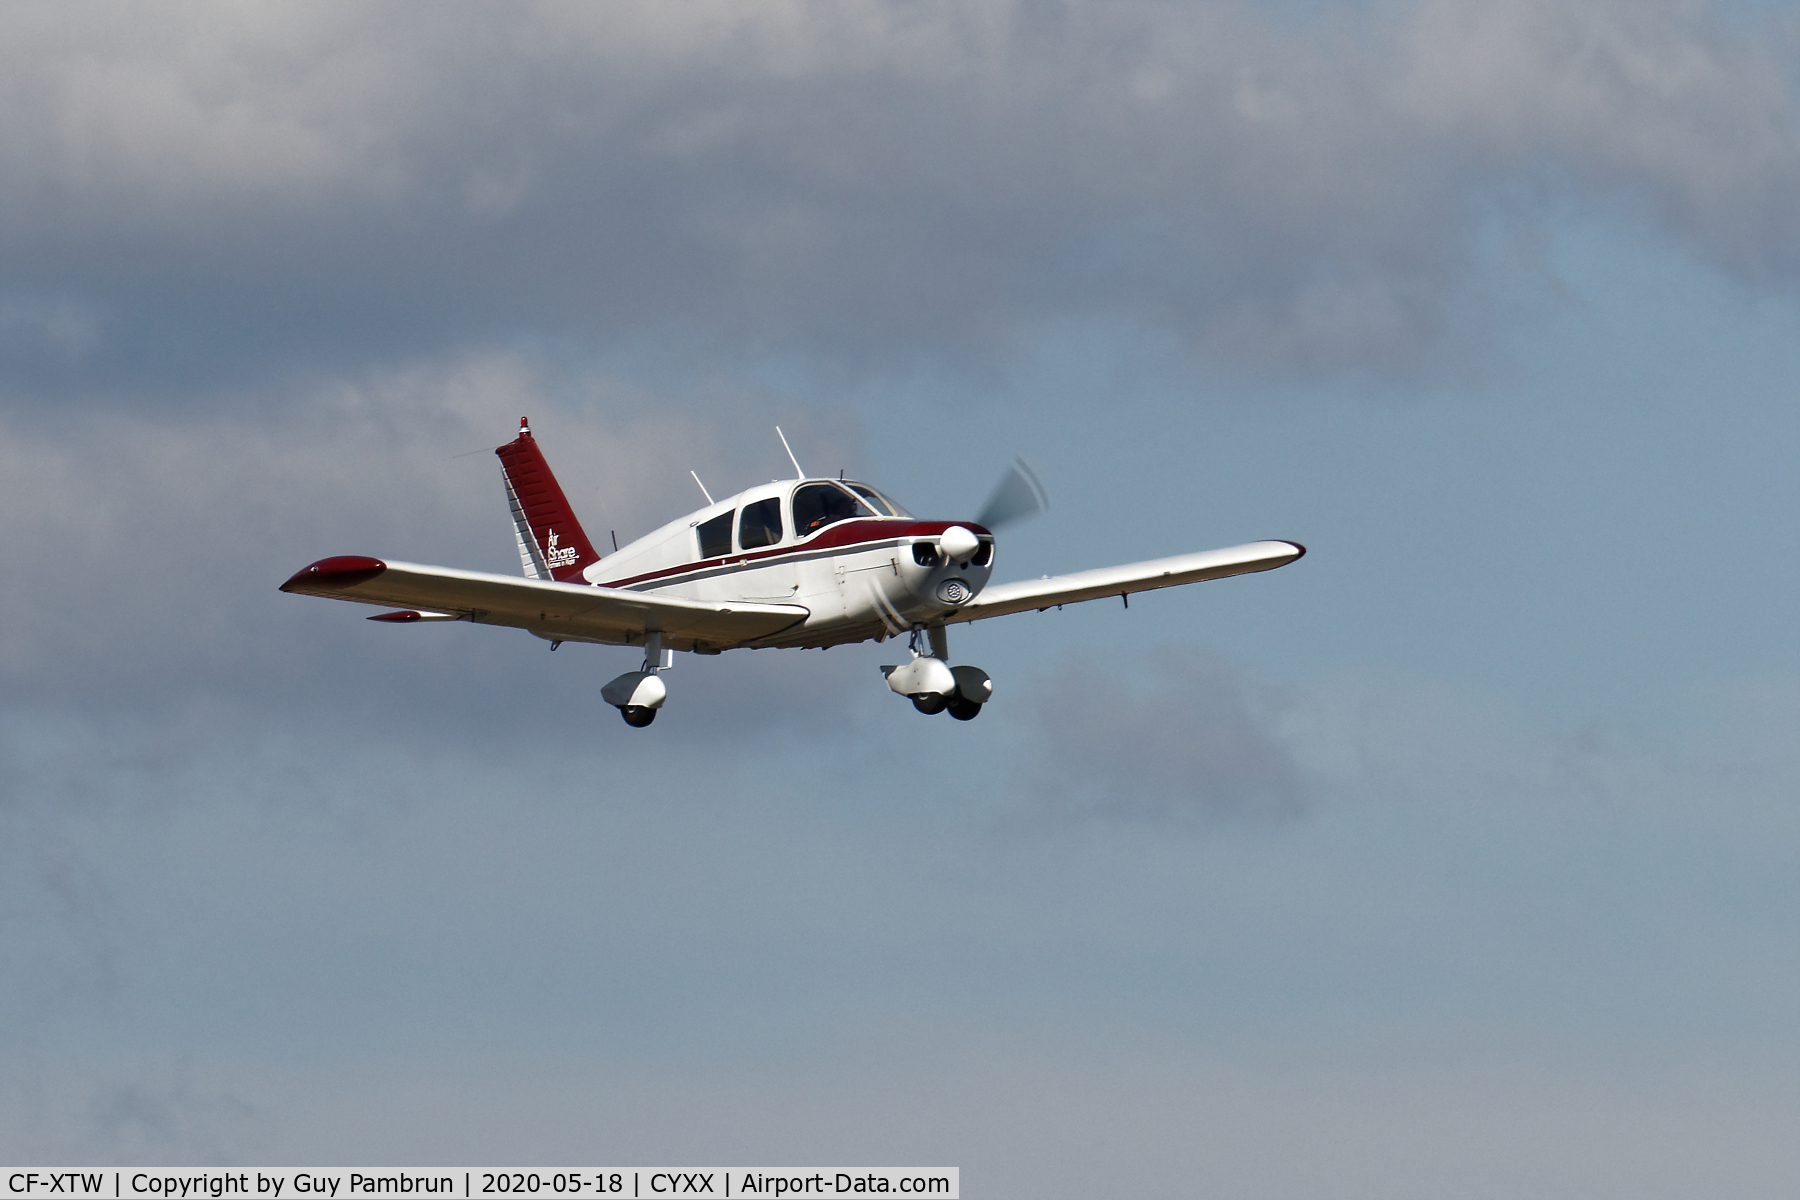 CF-XTW, 1968 Piper PA-28-140 C/N 28-25407, Landing on 19 for pilot briefing and departure to take part in 